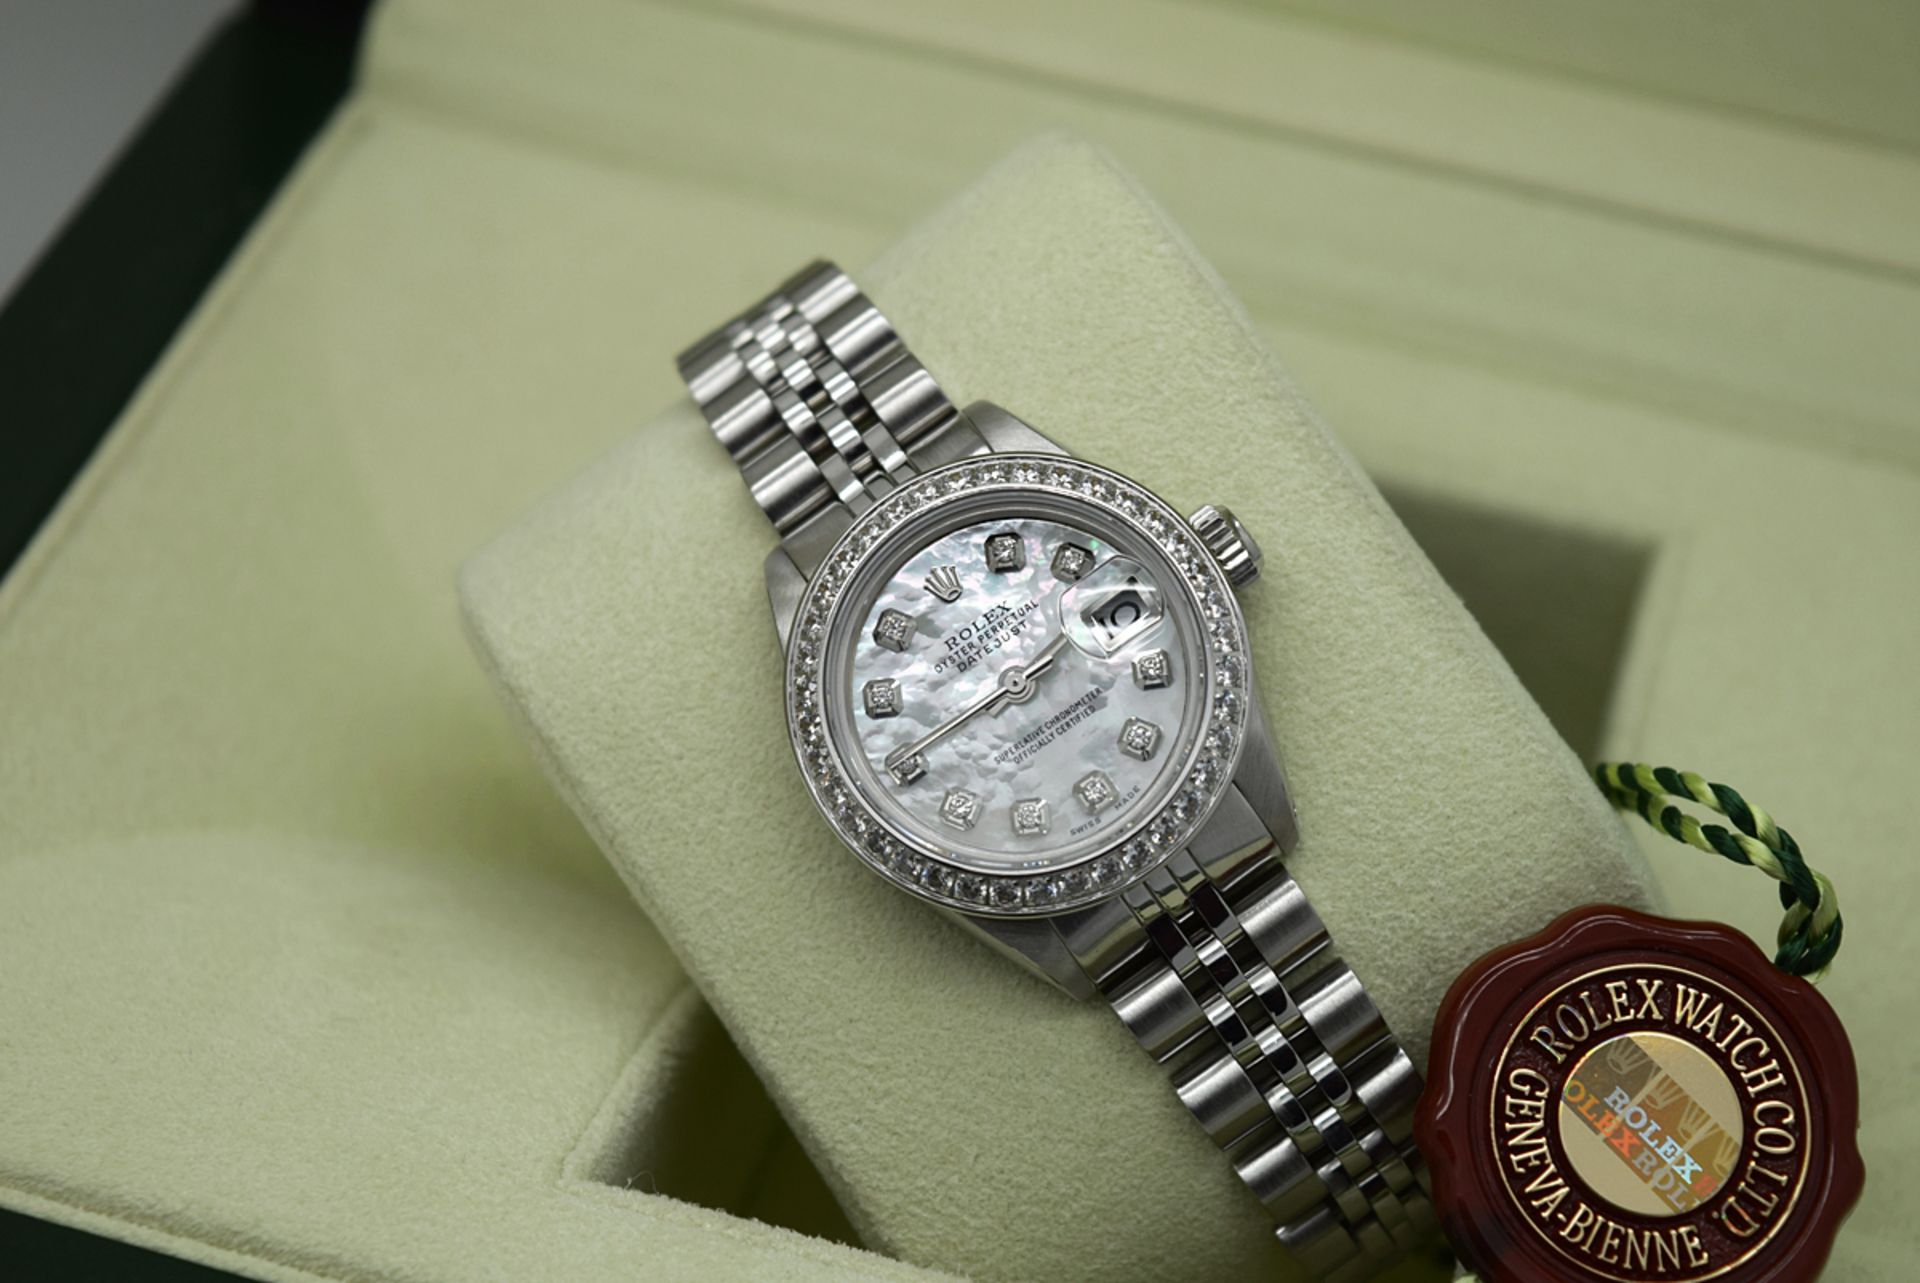 *STUNNING* ROLEX LADY DATEJUST - STAINLESS STEEL, DIAMOND MOP DIAL - Image 5 of 10